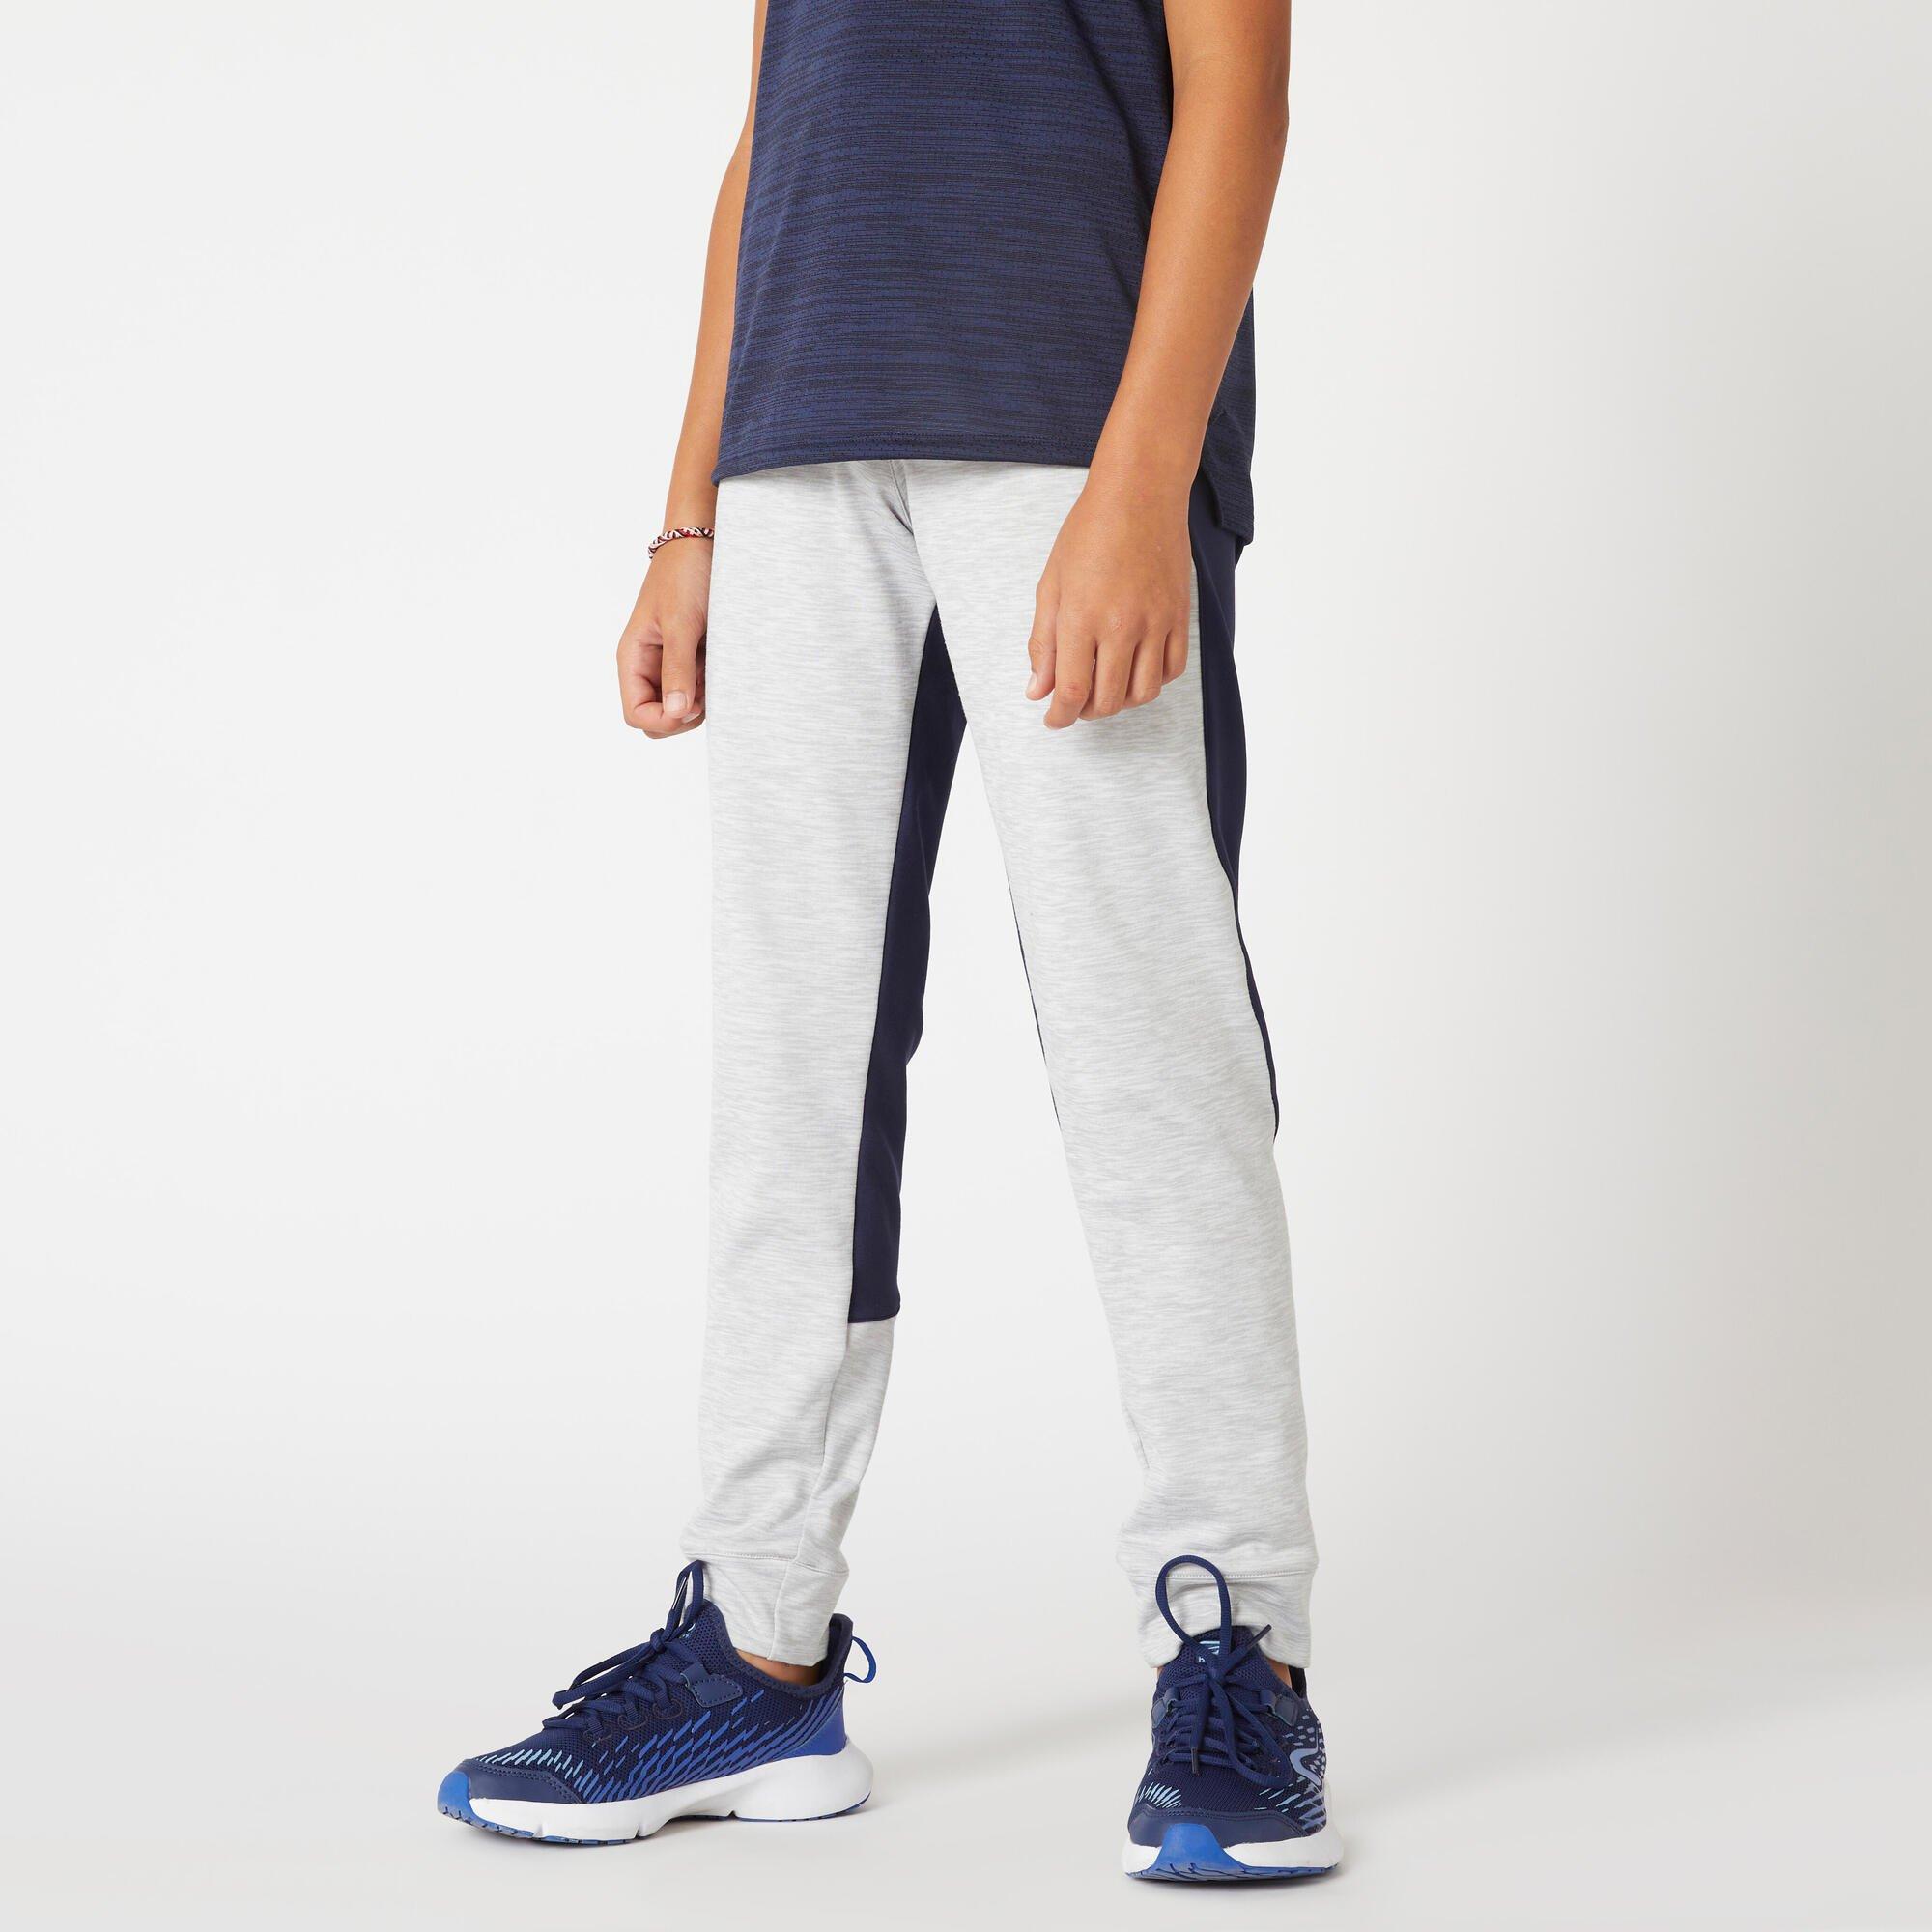 Decathlon Warm And Breathable Jogging Bottoms